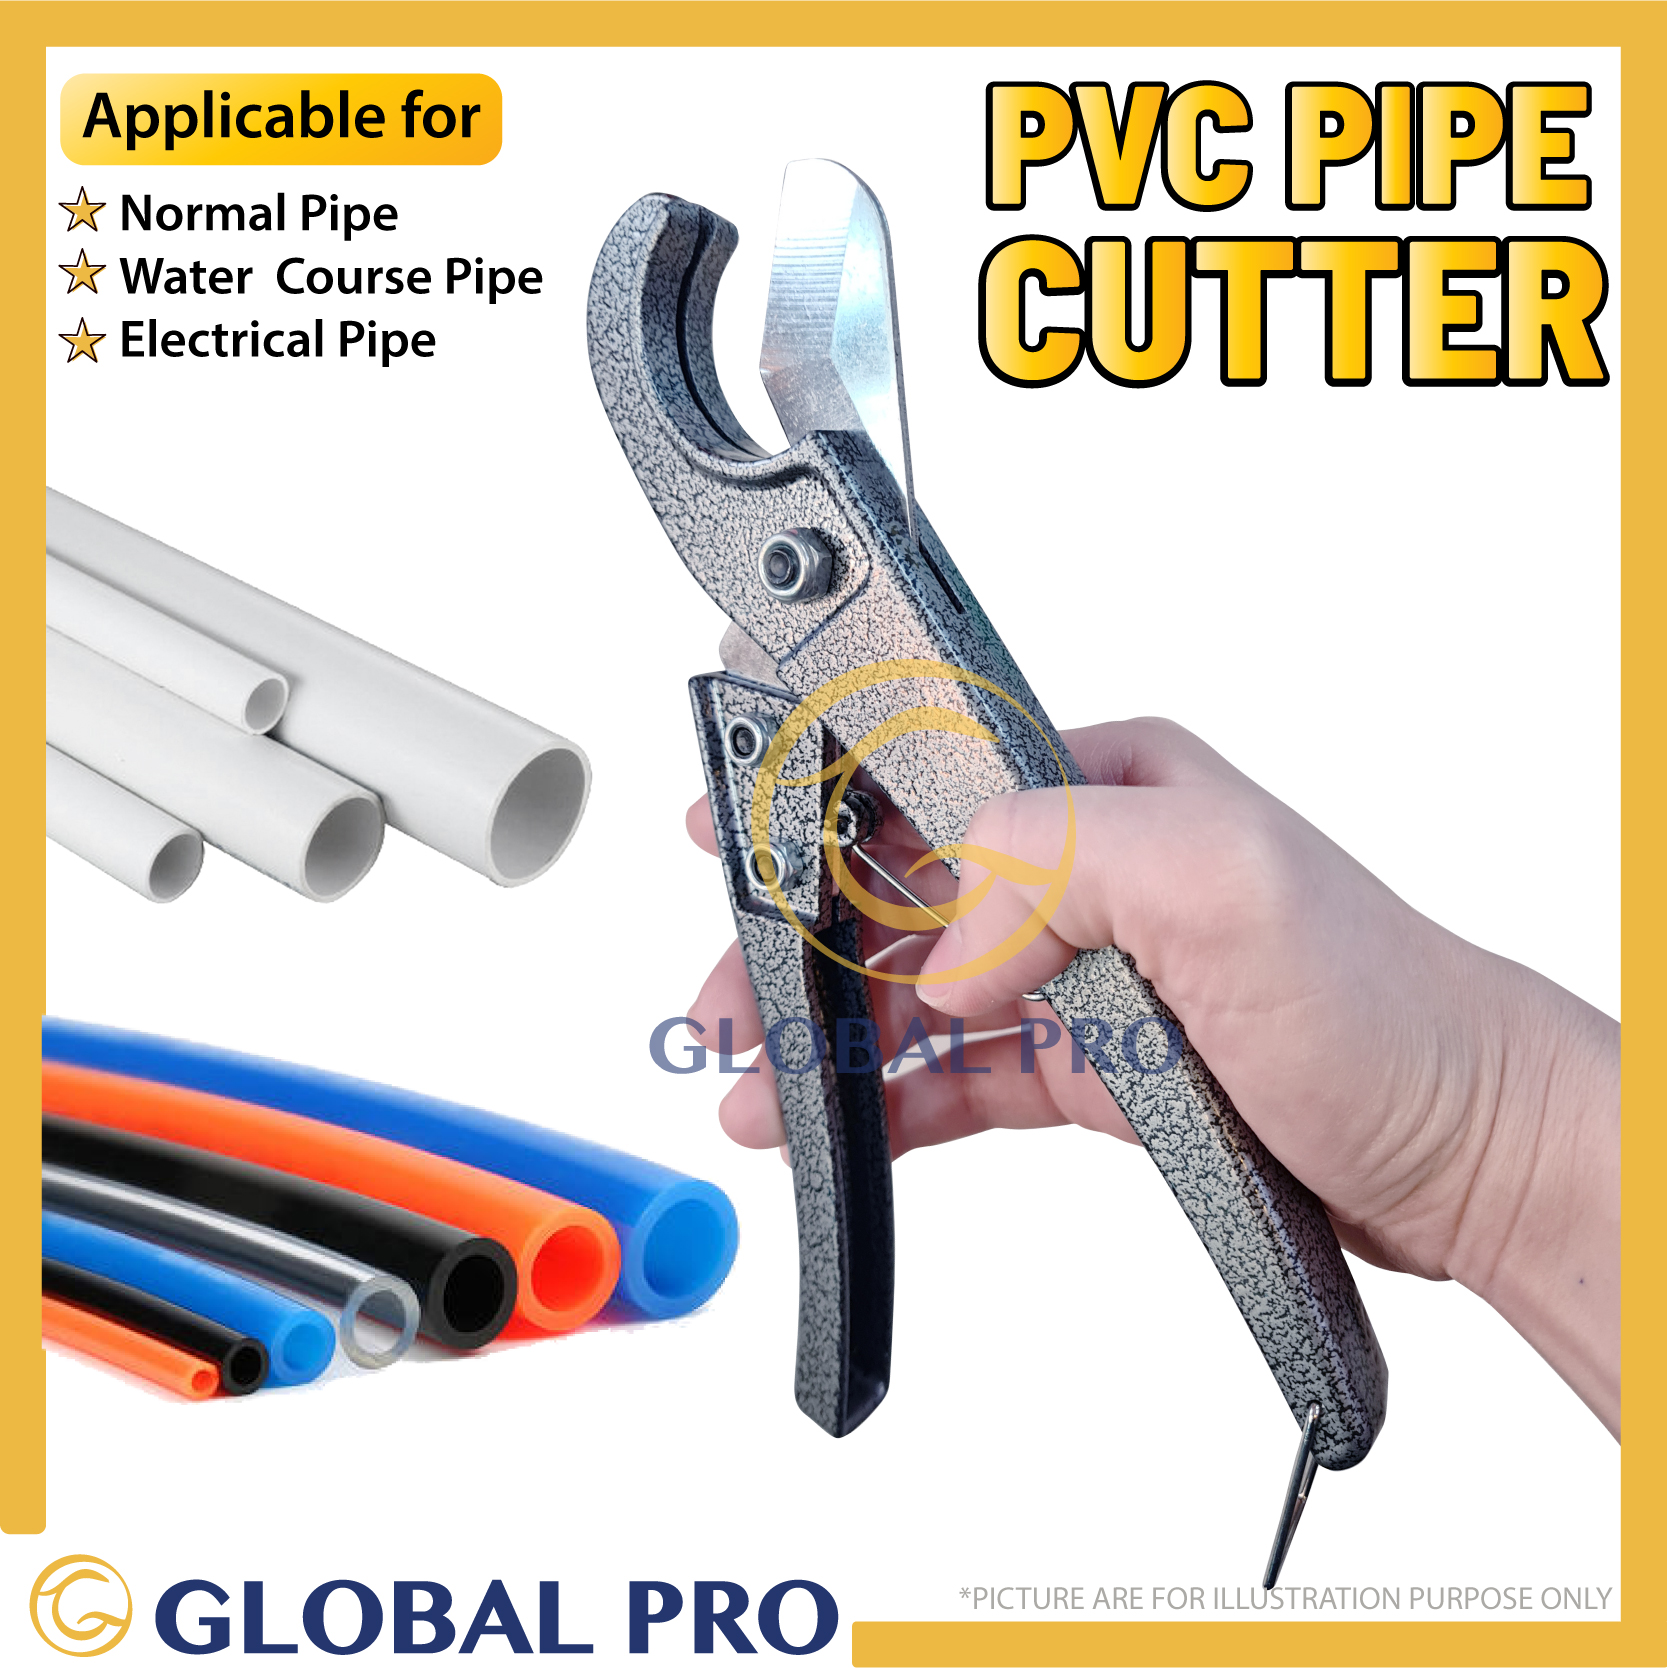 SHAI PP-R Cutter PVC Cutter Cuts up to 30mm Ratcheting Cutter One-hand Fast Pipe Cutting Tool Maintenance Plumber